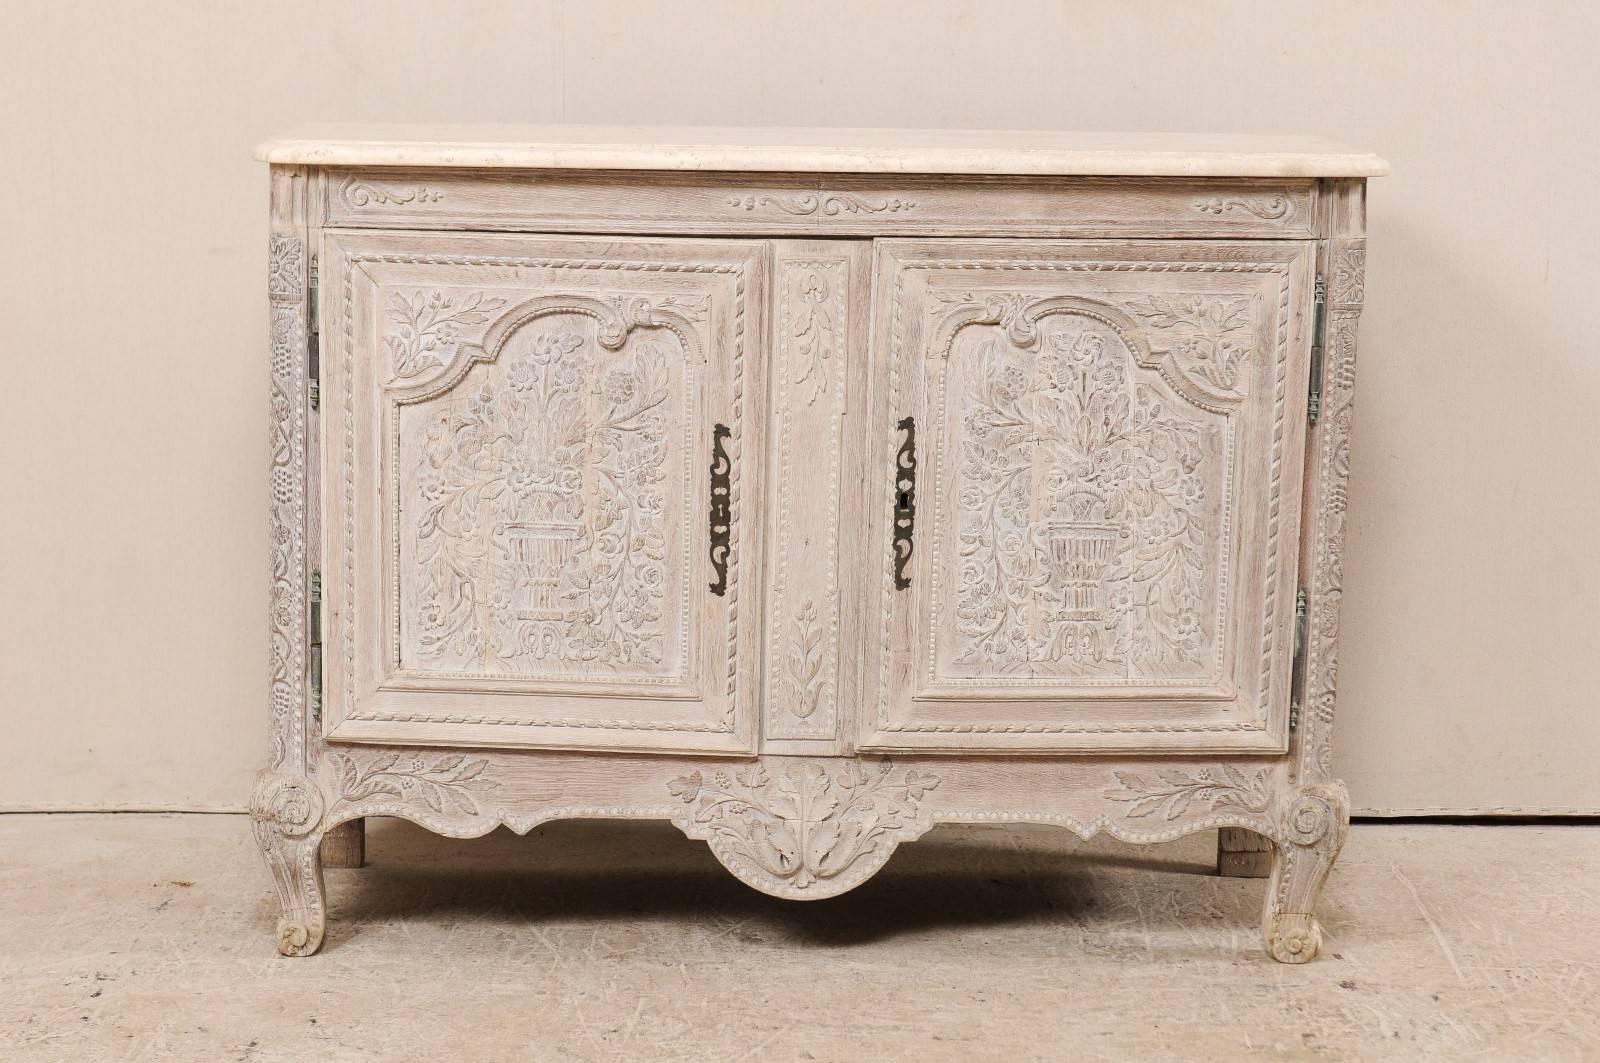 A French ornately carved wood cabinet with marble top from the early 20th century. This antique French buffet has unusually elaborate carvings which decorate it's front. The two paneled doors each feature finely detailed and intricate carvings